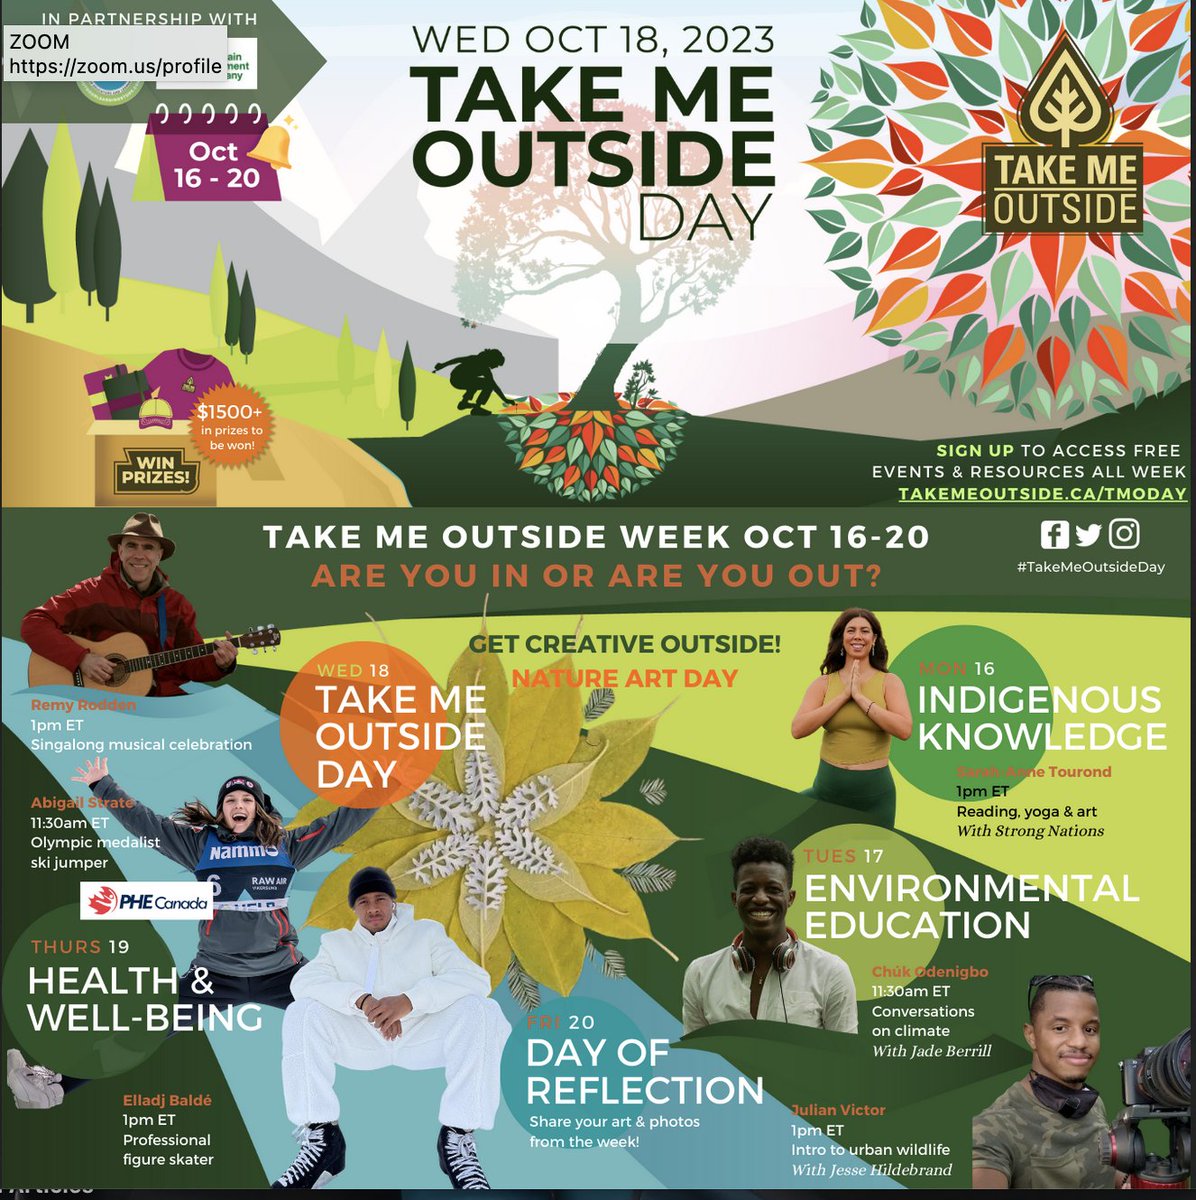 Starts tomorrow! #TakeMeOutsideDay From Oct 16th - 20th, join in for a week of speakers, activities, & awesome prizes. Discover the amazing lrning that happens beyond the four walls of a classroom. Are you IN to get OUT? @takemeoutside #walkingcurriculum #getoutside